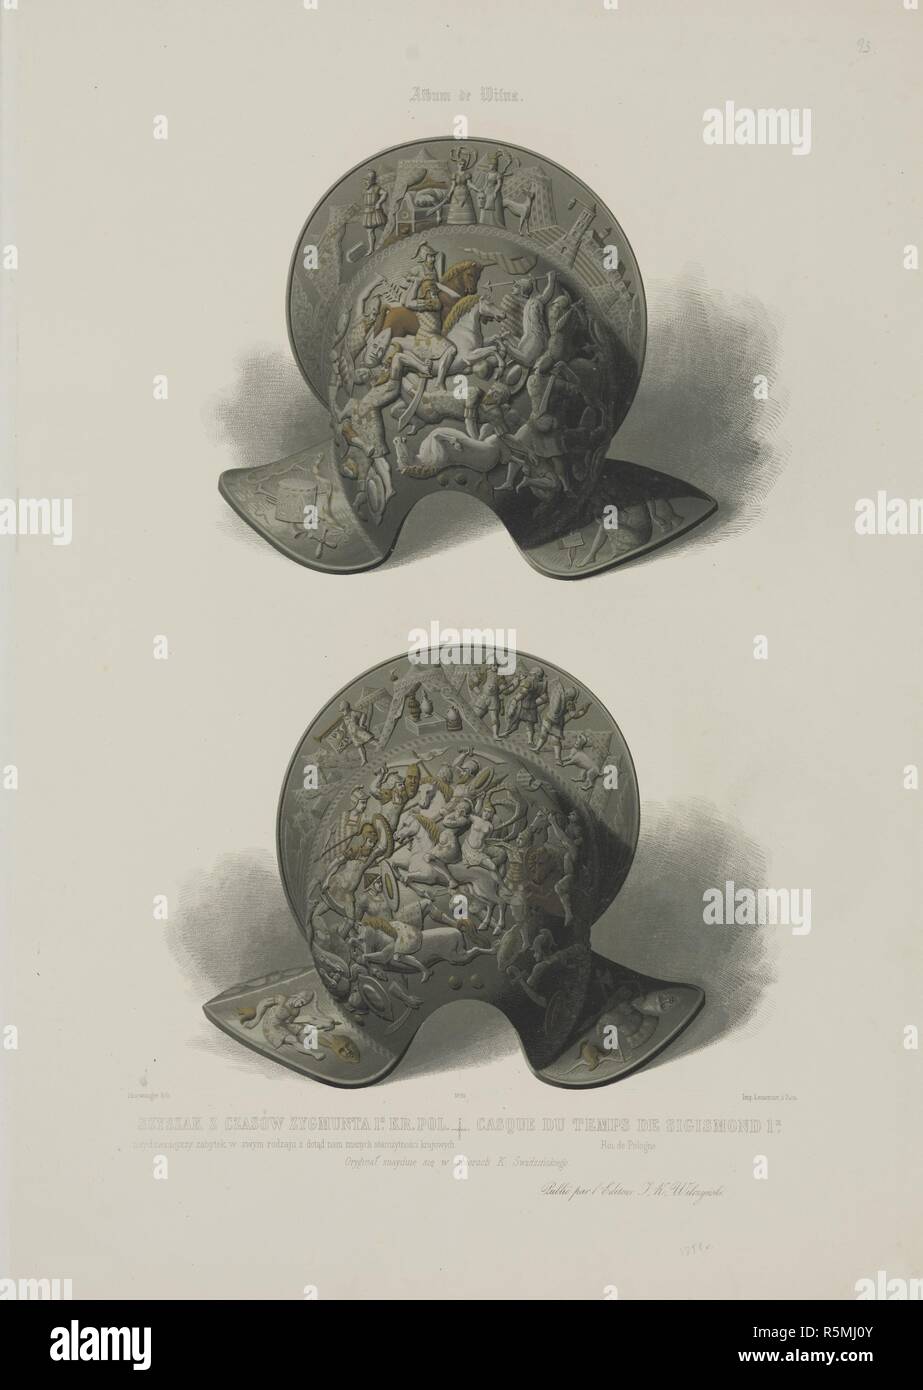 Pot helmet of King Sigismund I of Poland. Museum: PRIVATE COLLECTION. Author: Thurwanger, Martin T. Stock Photo